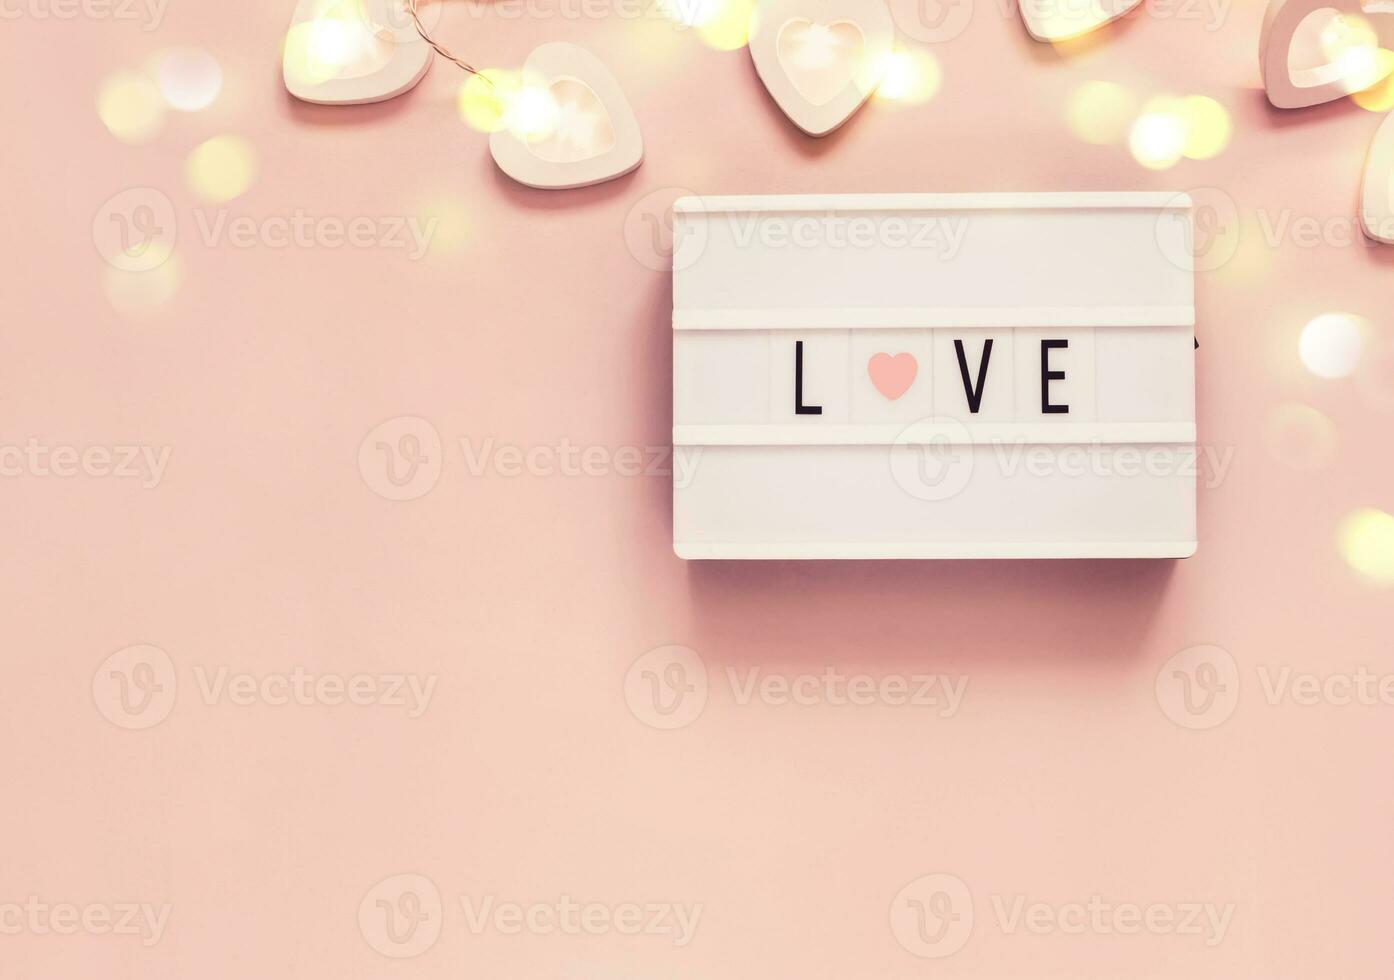 Pastel Valentine's day decoration with word love on lightboard and heart shape garland. Valentine's day or wedding party concept photo